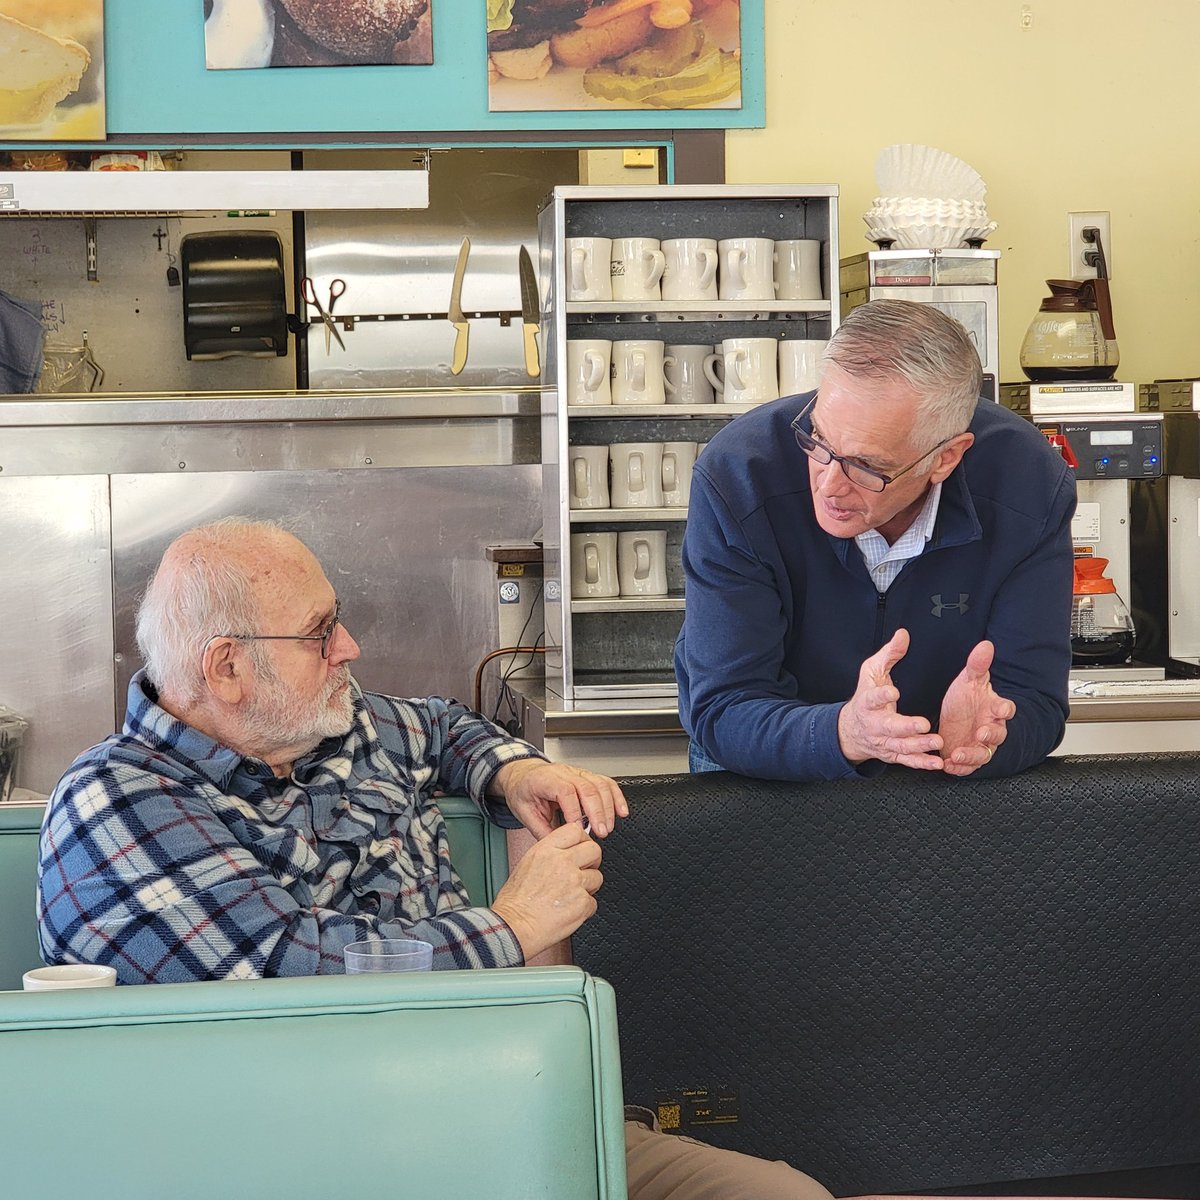 Meeting with a constituent as we stopped by for lunch in Florence. They were very concerned about what's going on in our nation's Capitol. I'm a firm no vote on this #spendingbill. It's simply more of the same pork with just different language, even going as far as funding other